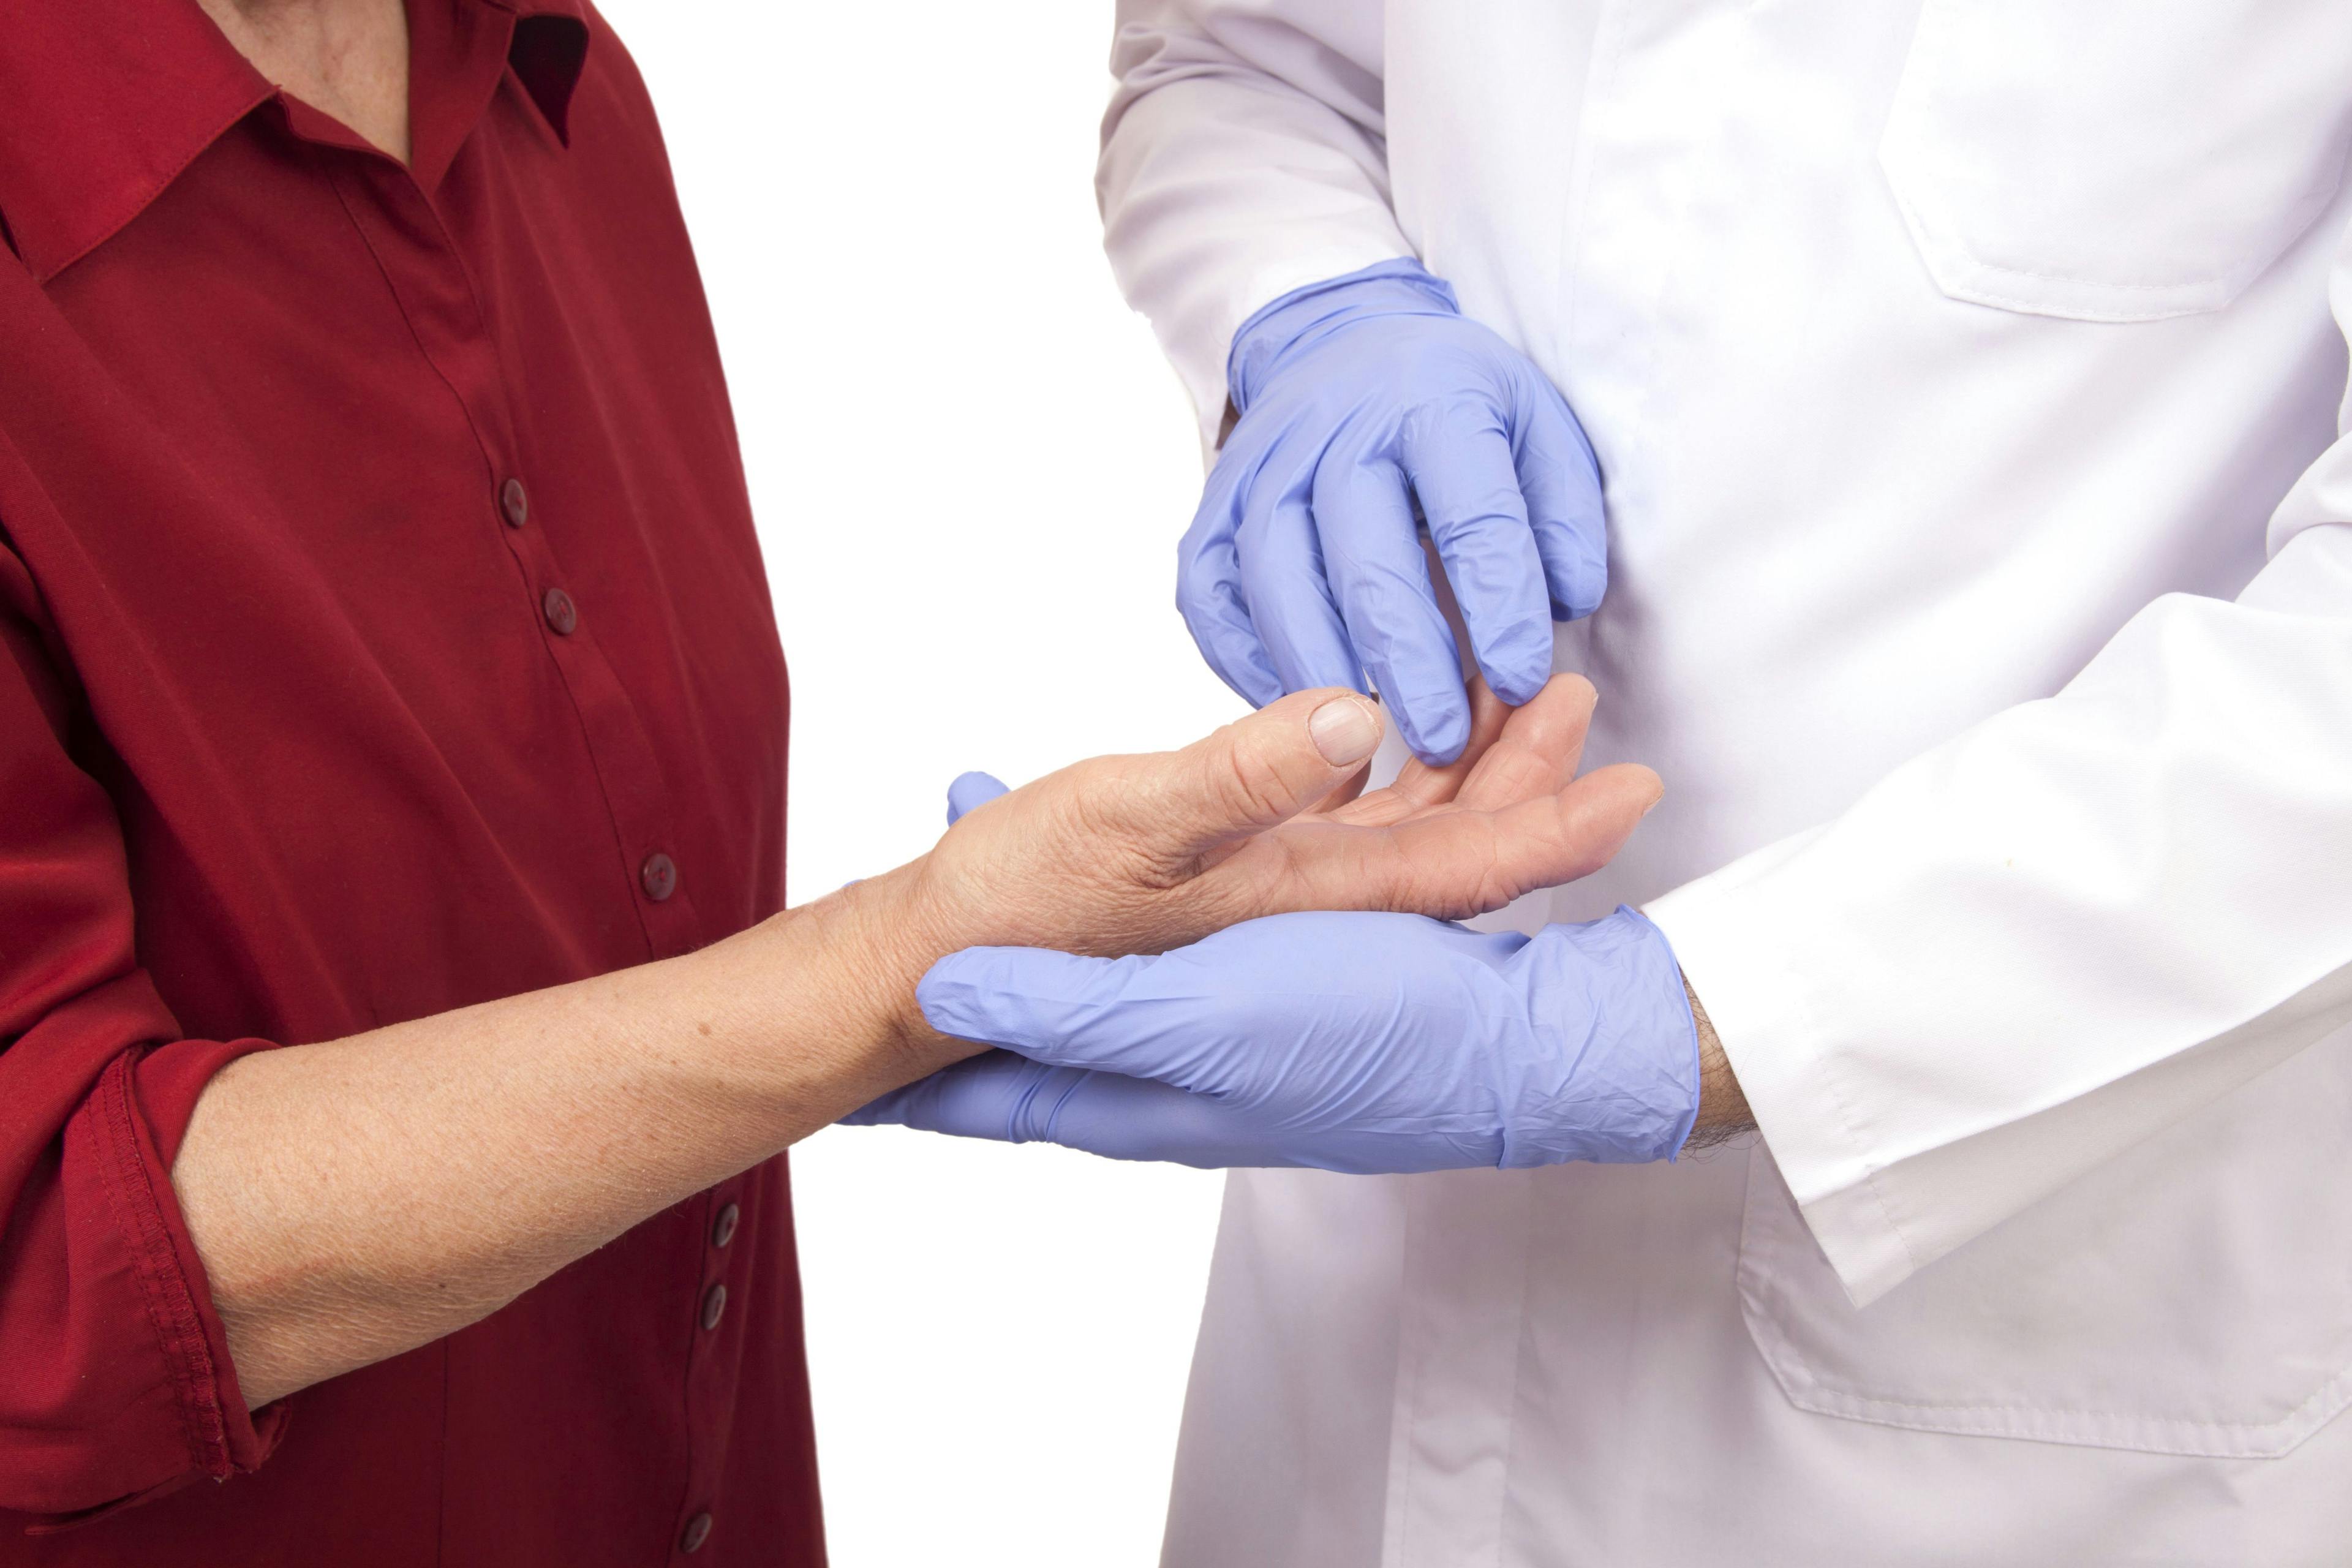 Physician checking patient's hand.